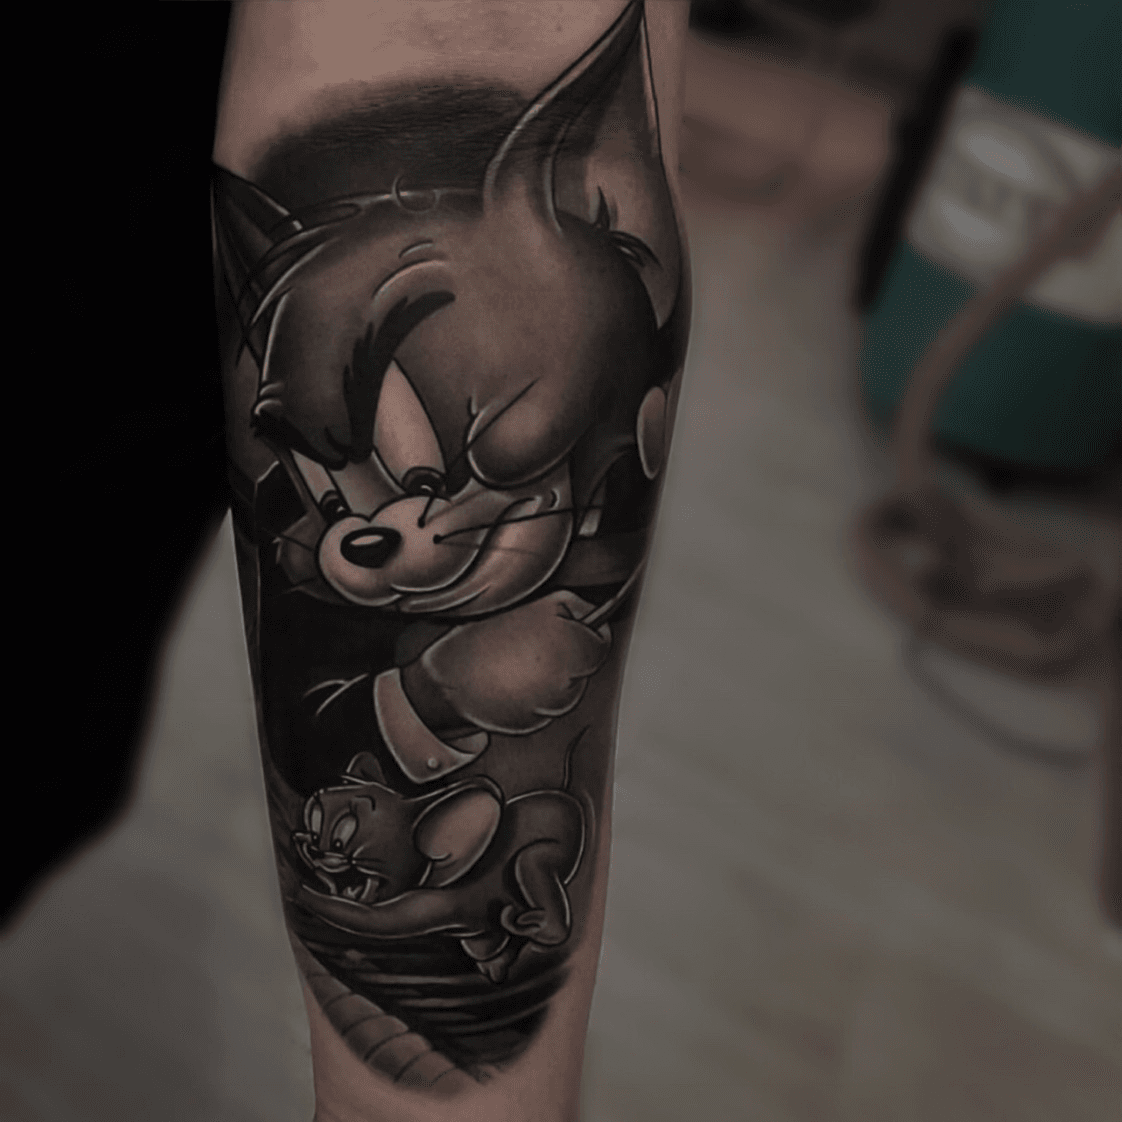 WOW Amazing Tom  Jerry Tattoo Designs 2021  Your Favourite Tom  Jerry  Tattoo Design Ideas  YouTube